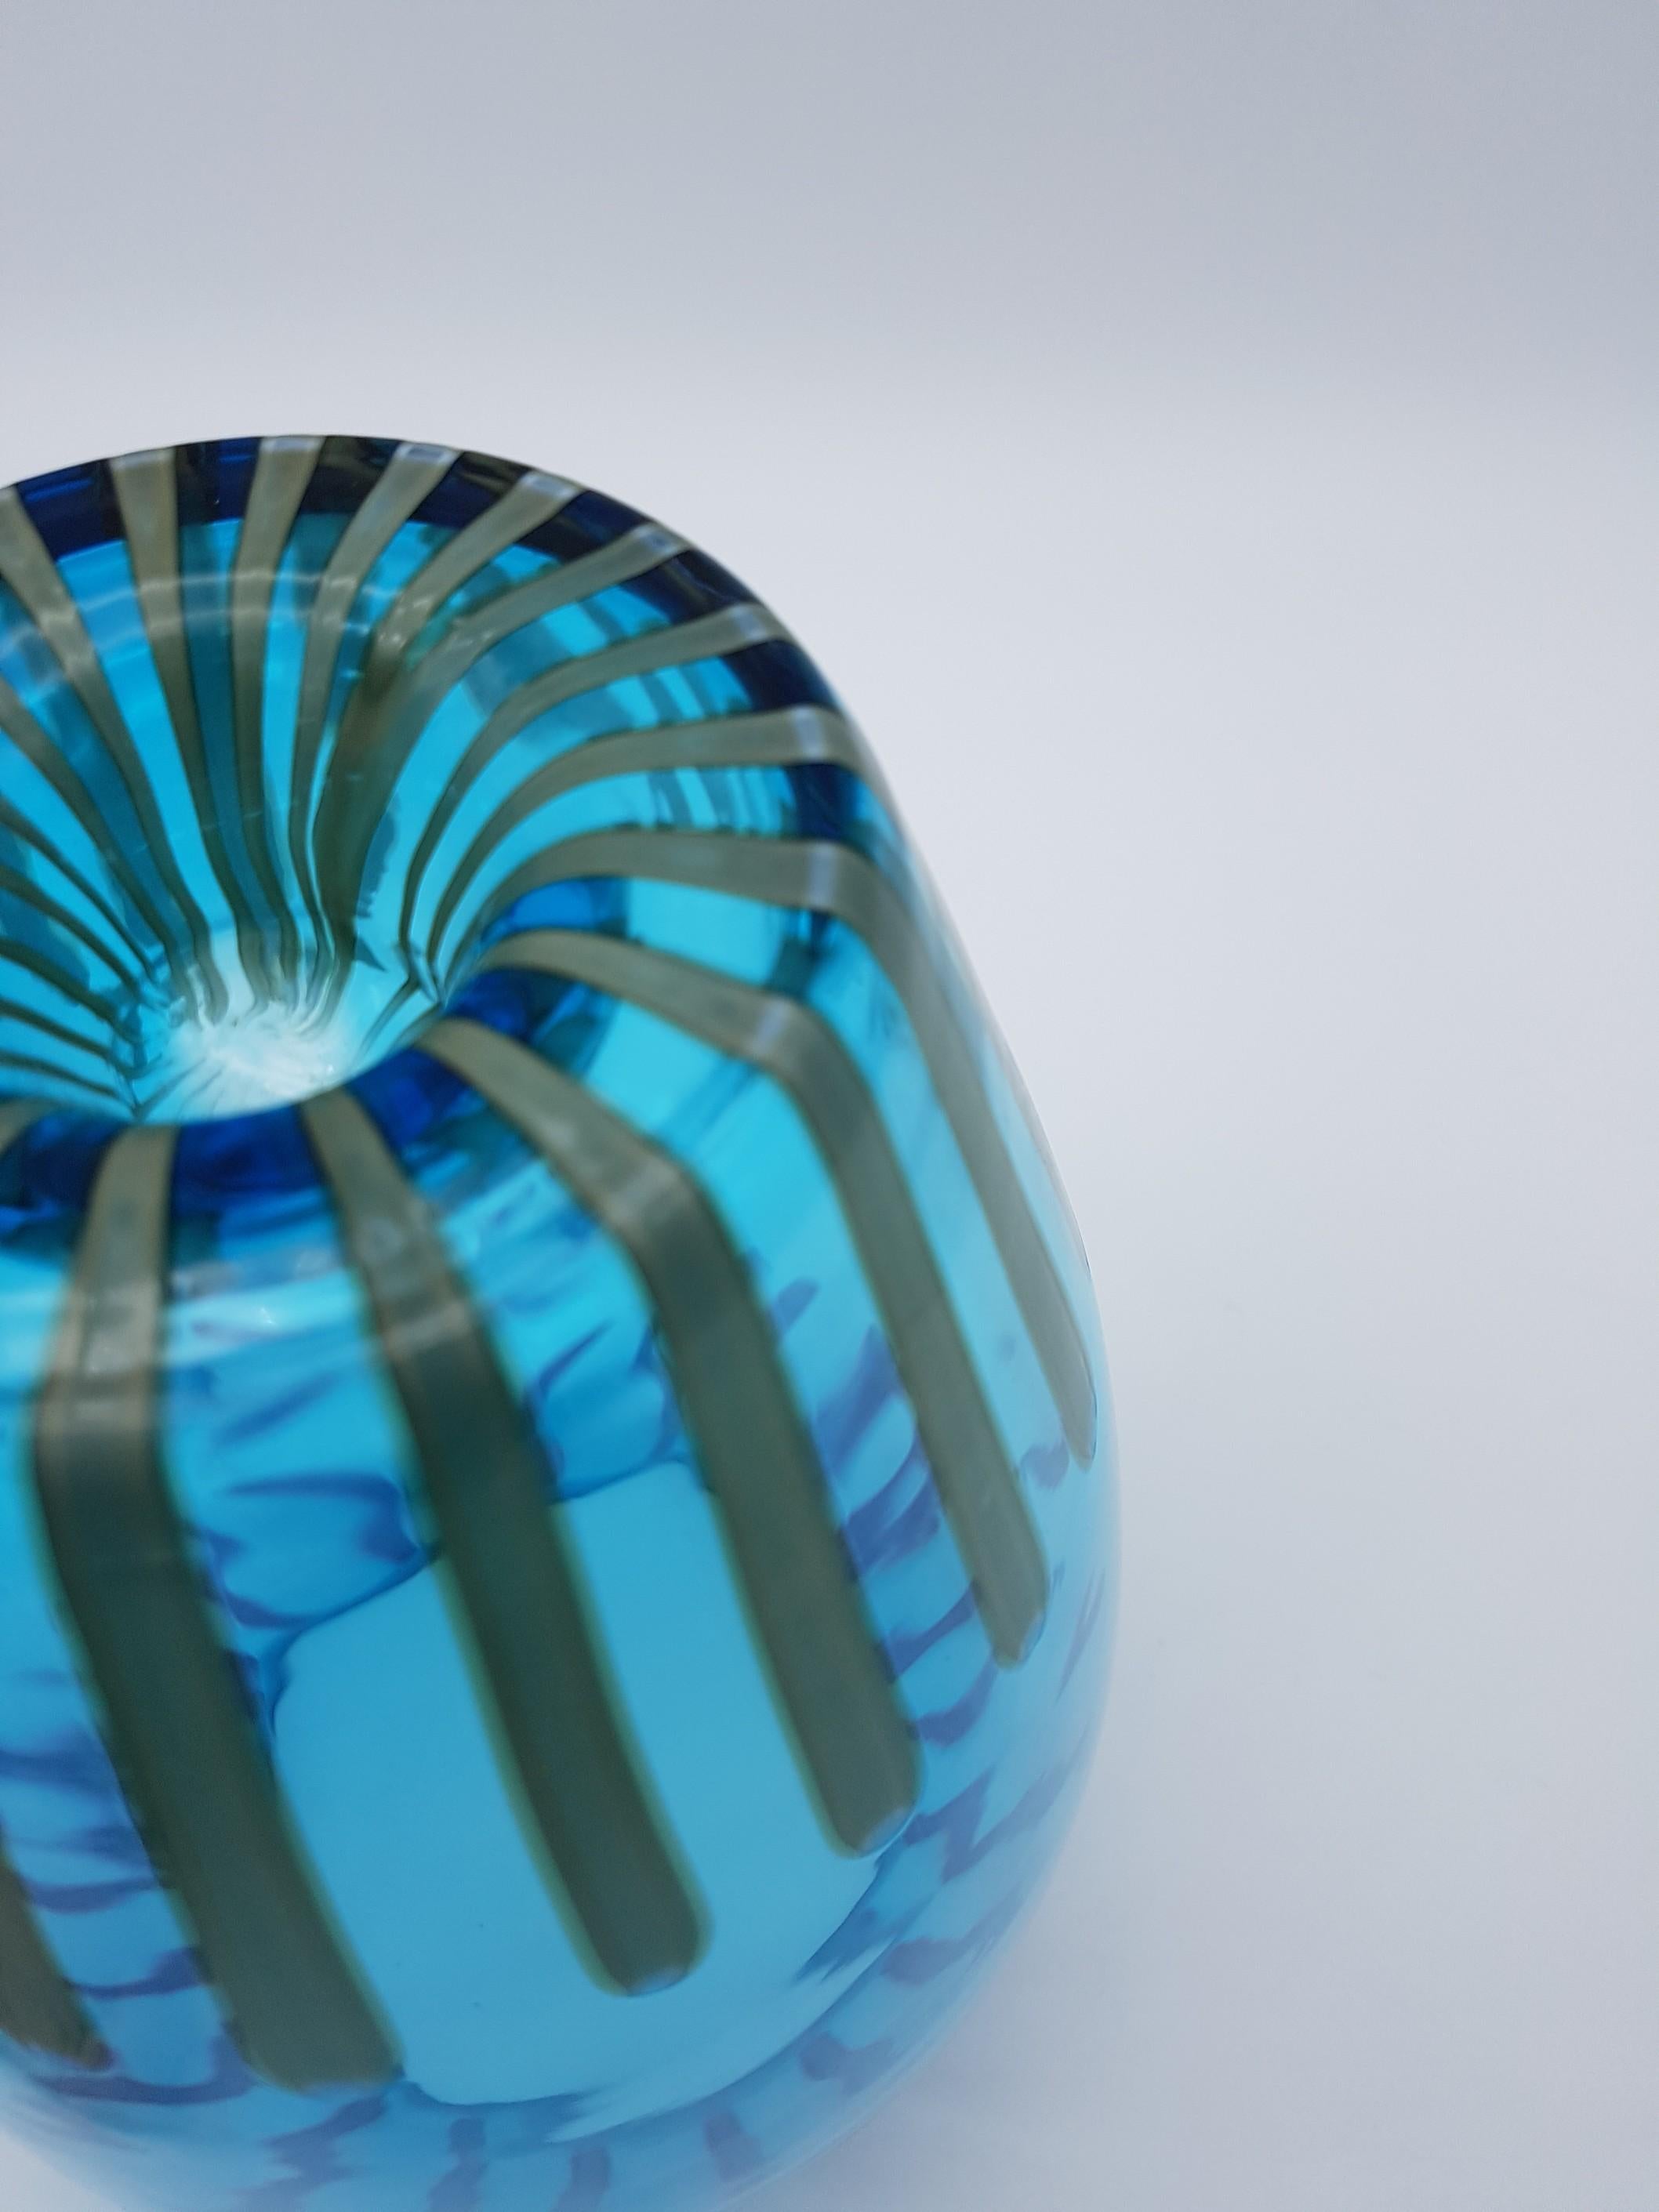 Modern Turquoise/Blue Murano-Glass Vase by Gino Cenedese E Figlio, late 1990s For Sale 2